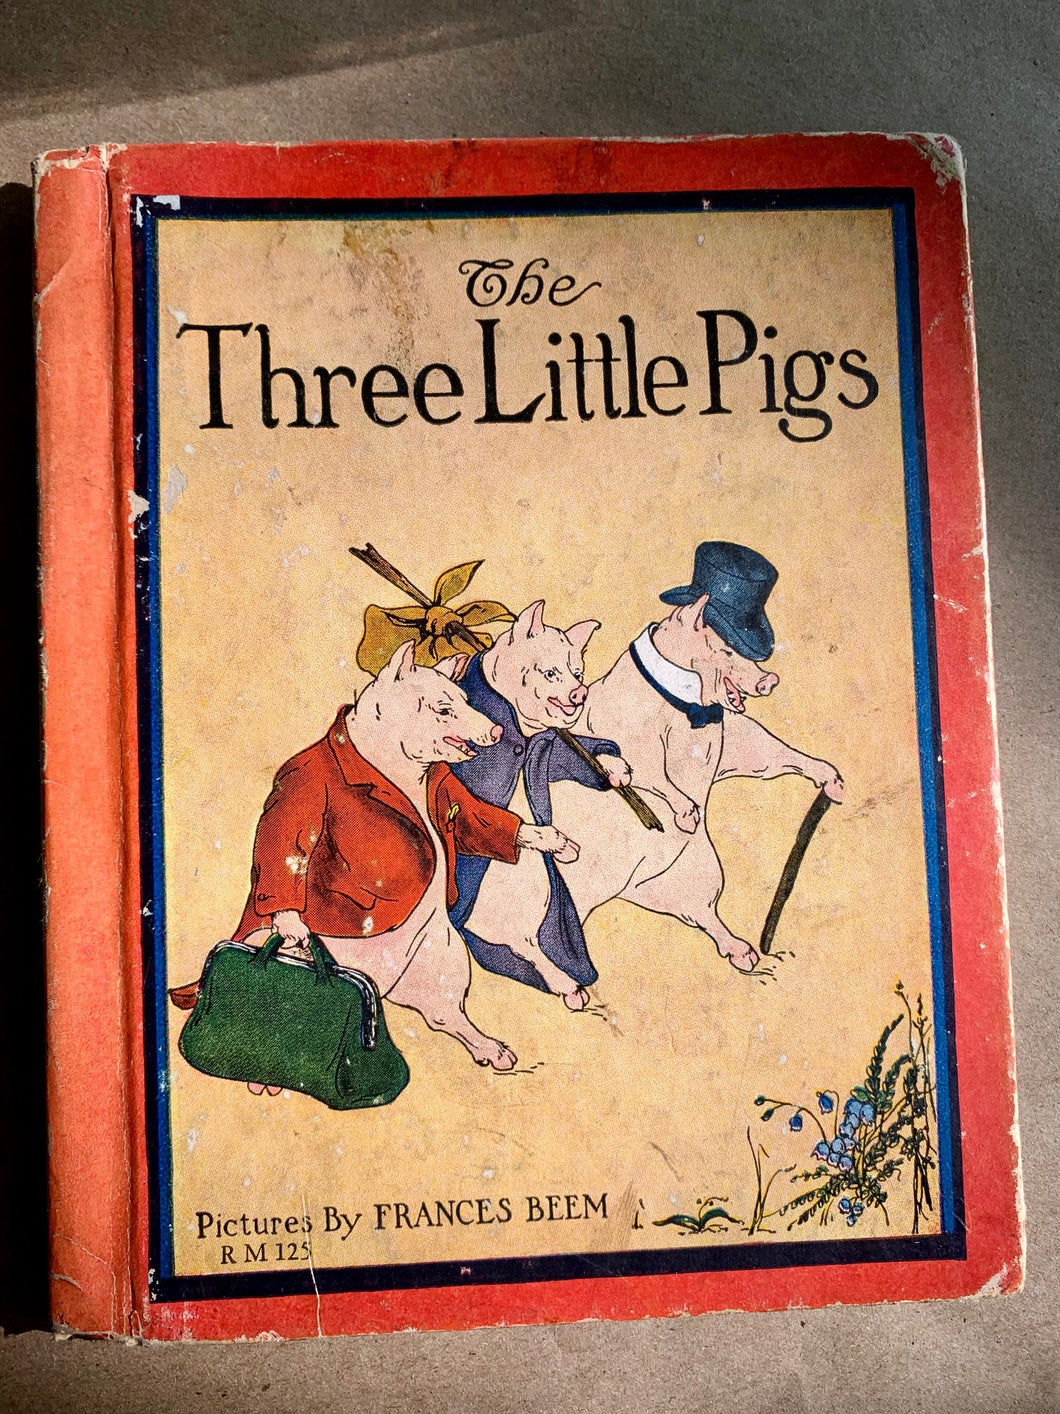 The 3 Three Little Pigs and the Foolish Pig by Frances Beem Antique Childrens Bk